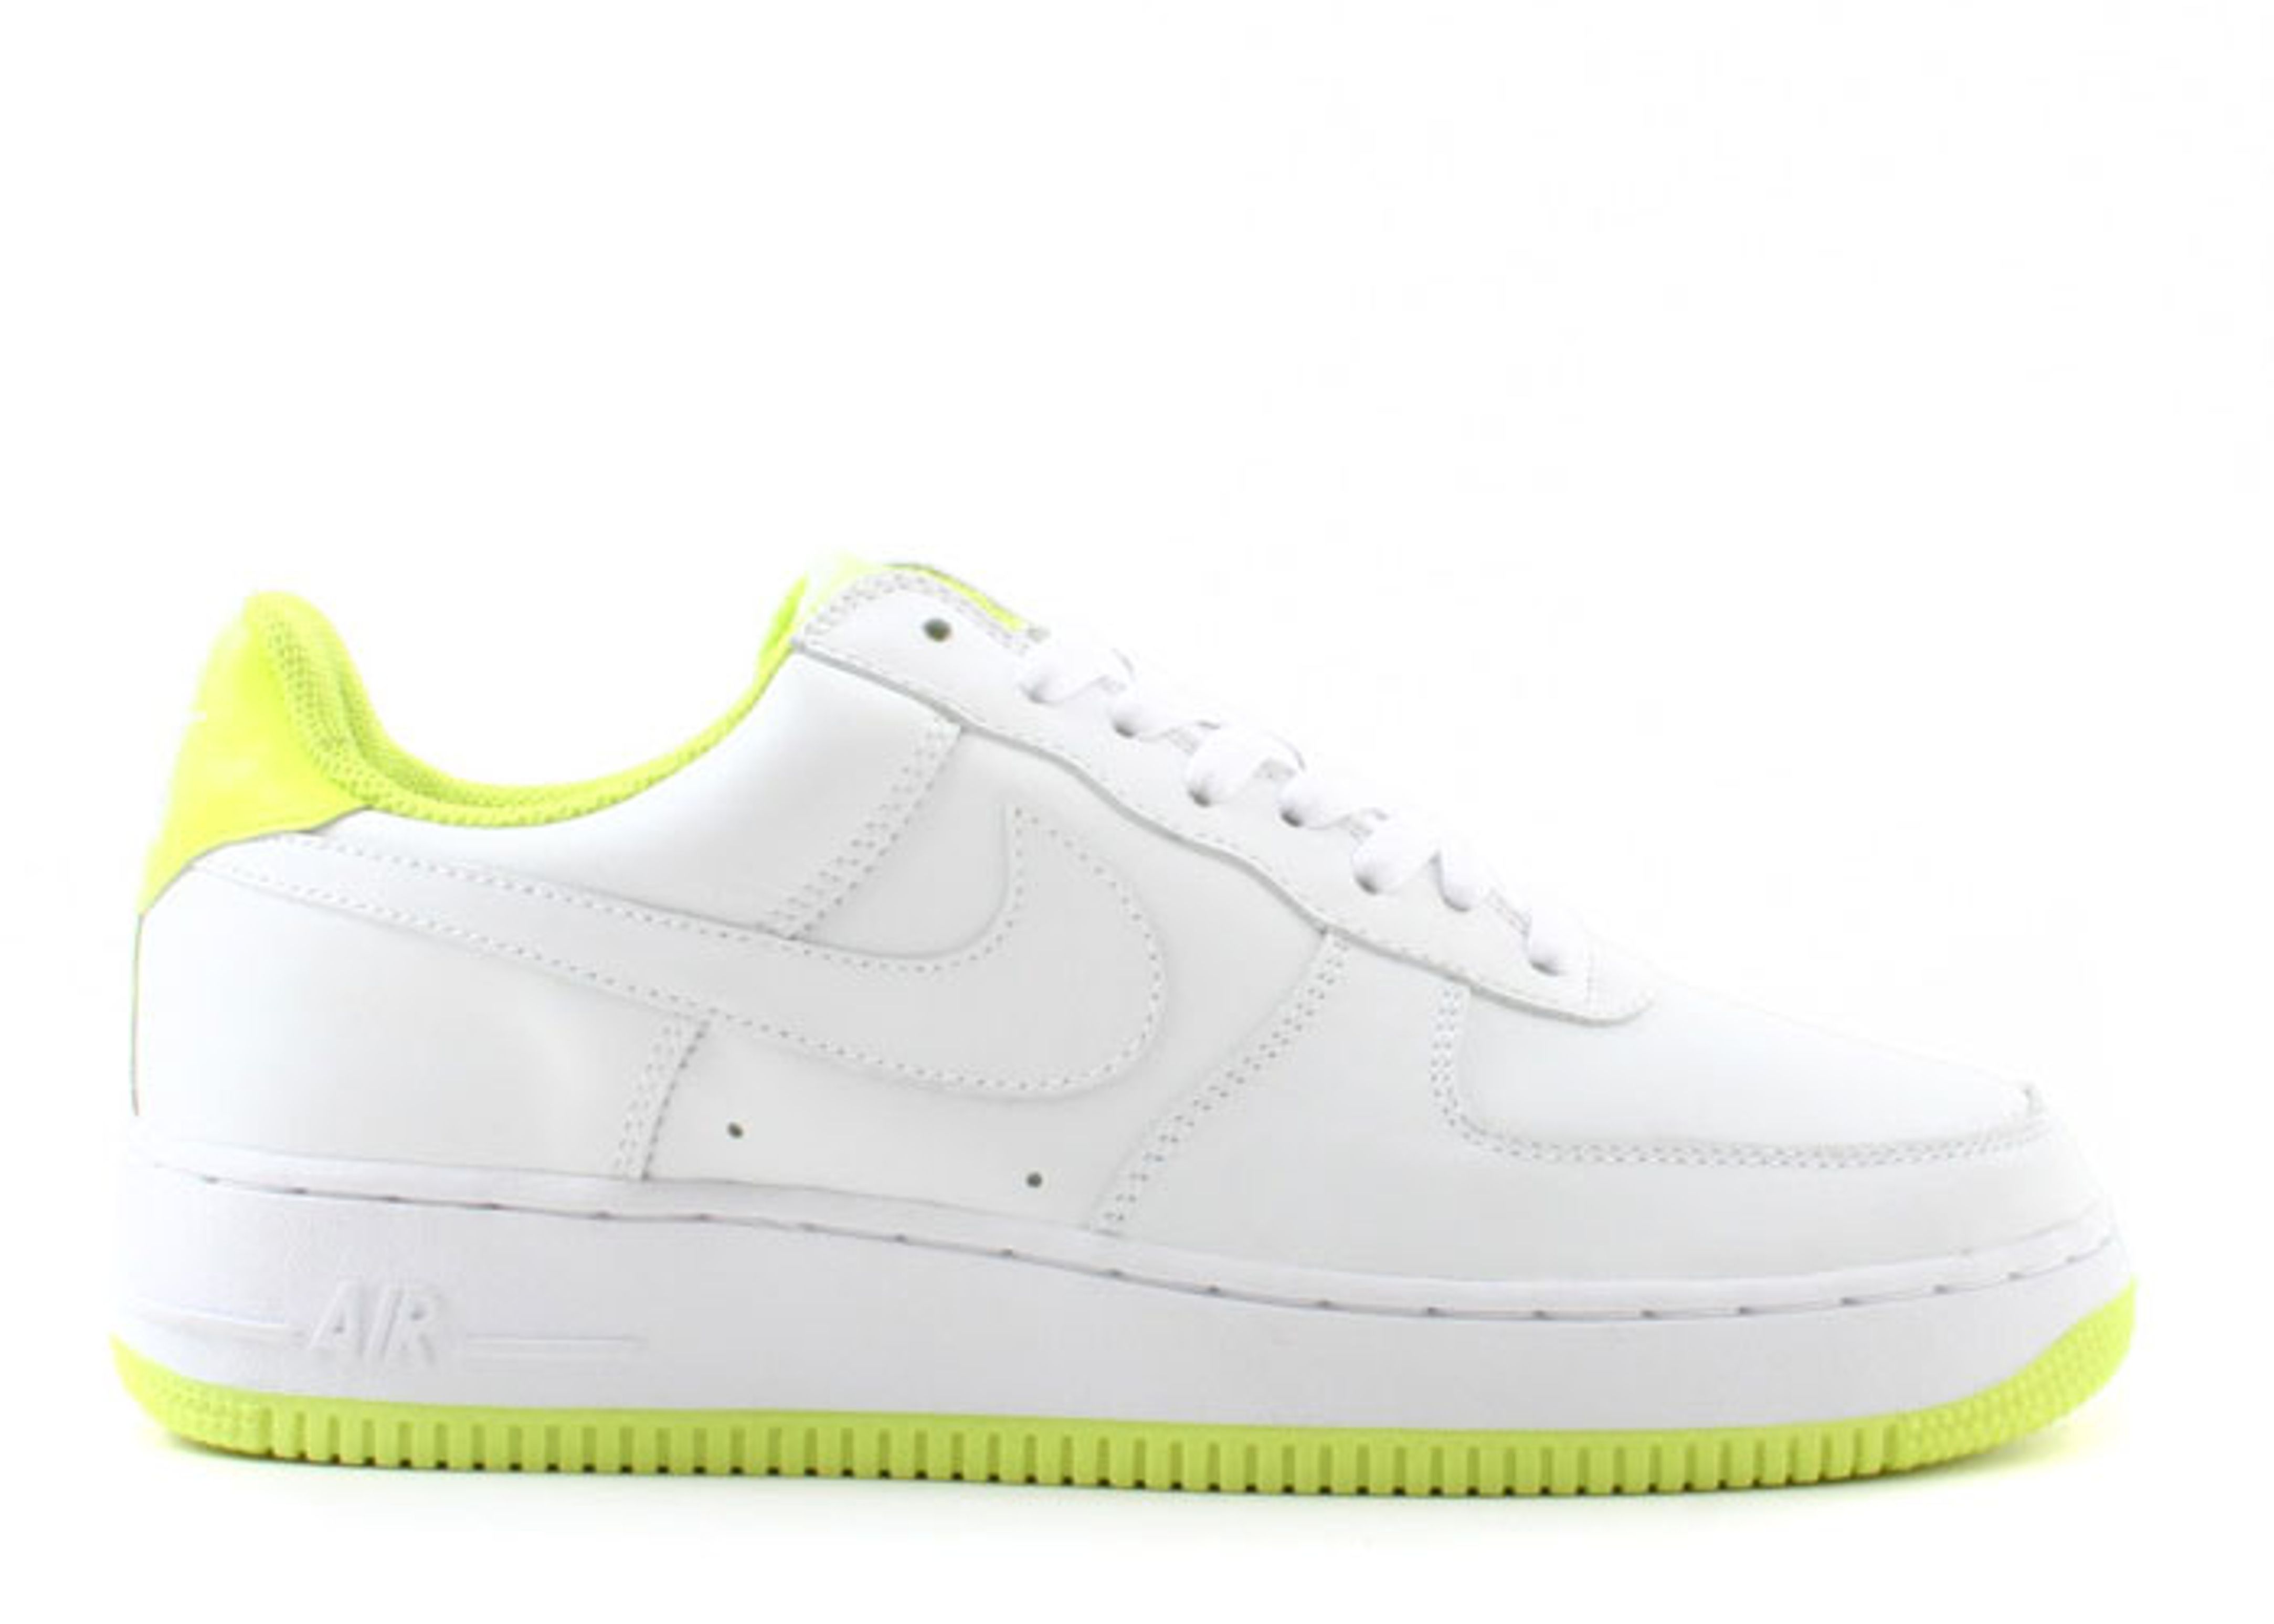 neon nike shoes air force 1